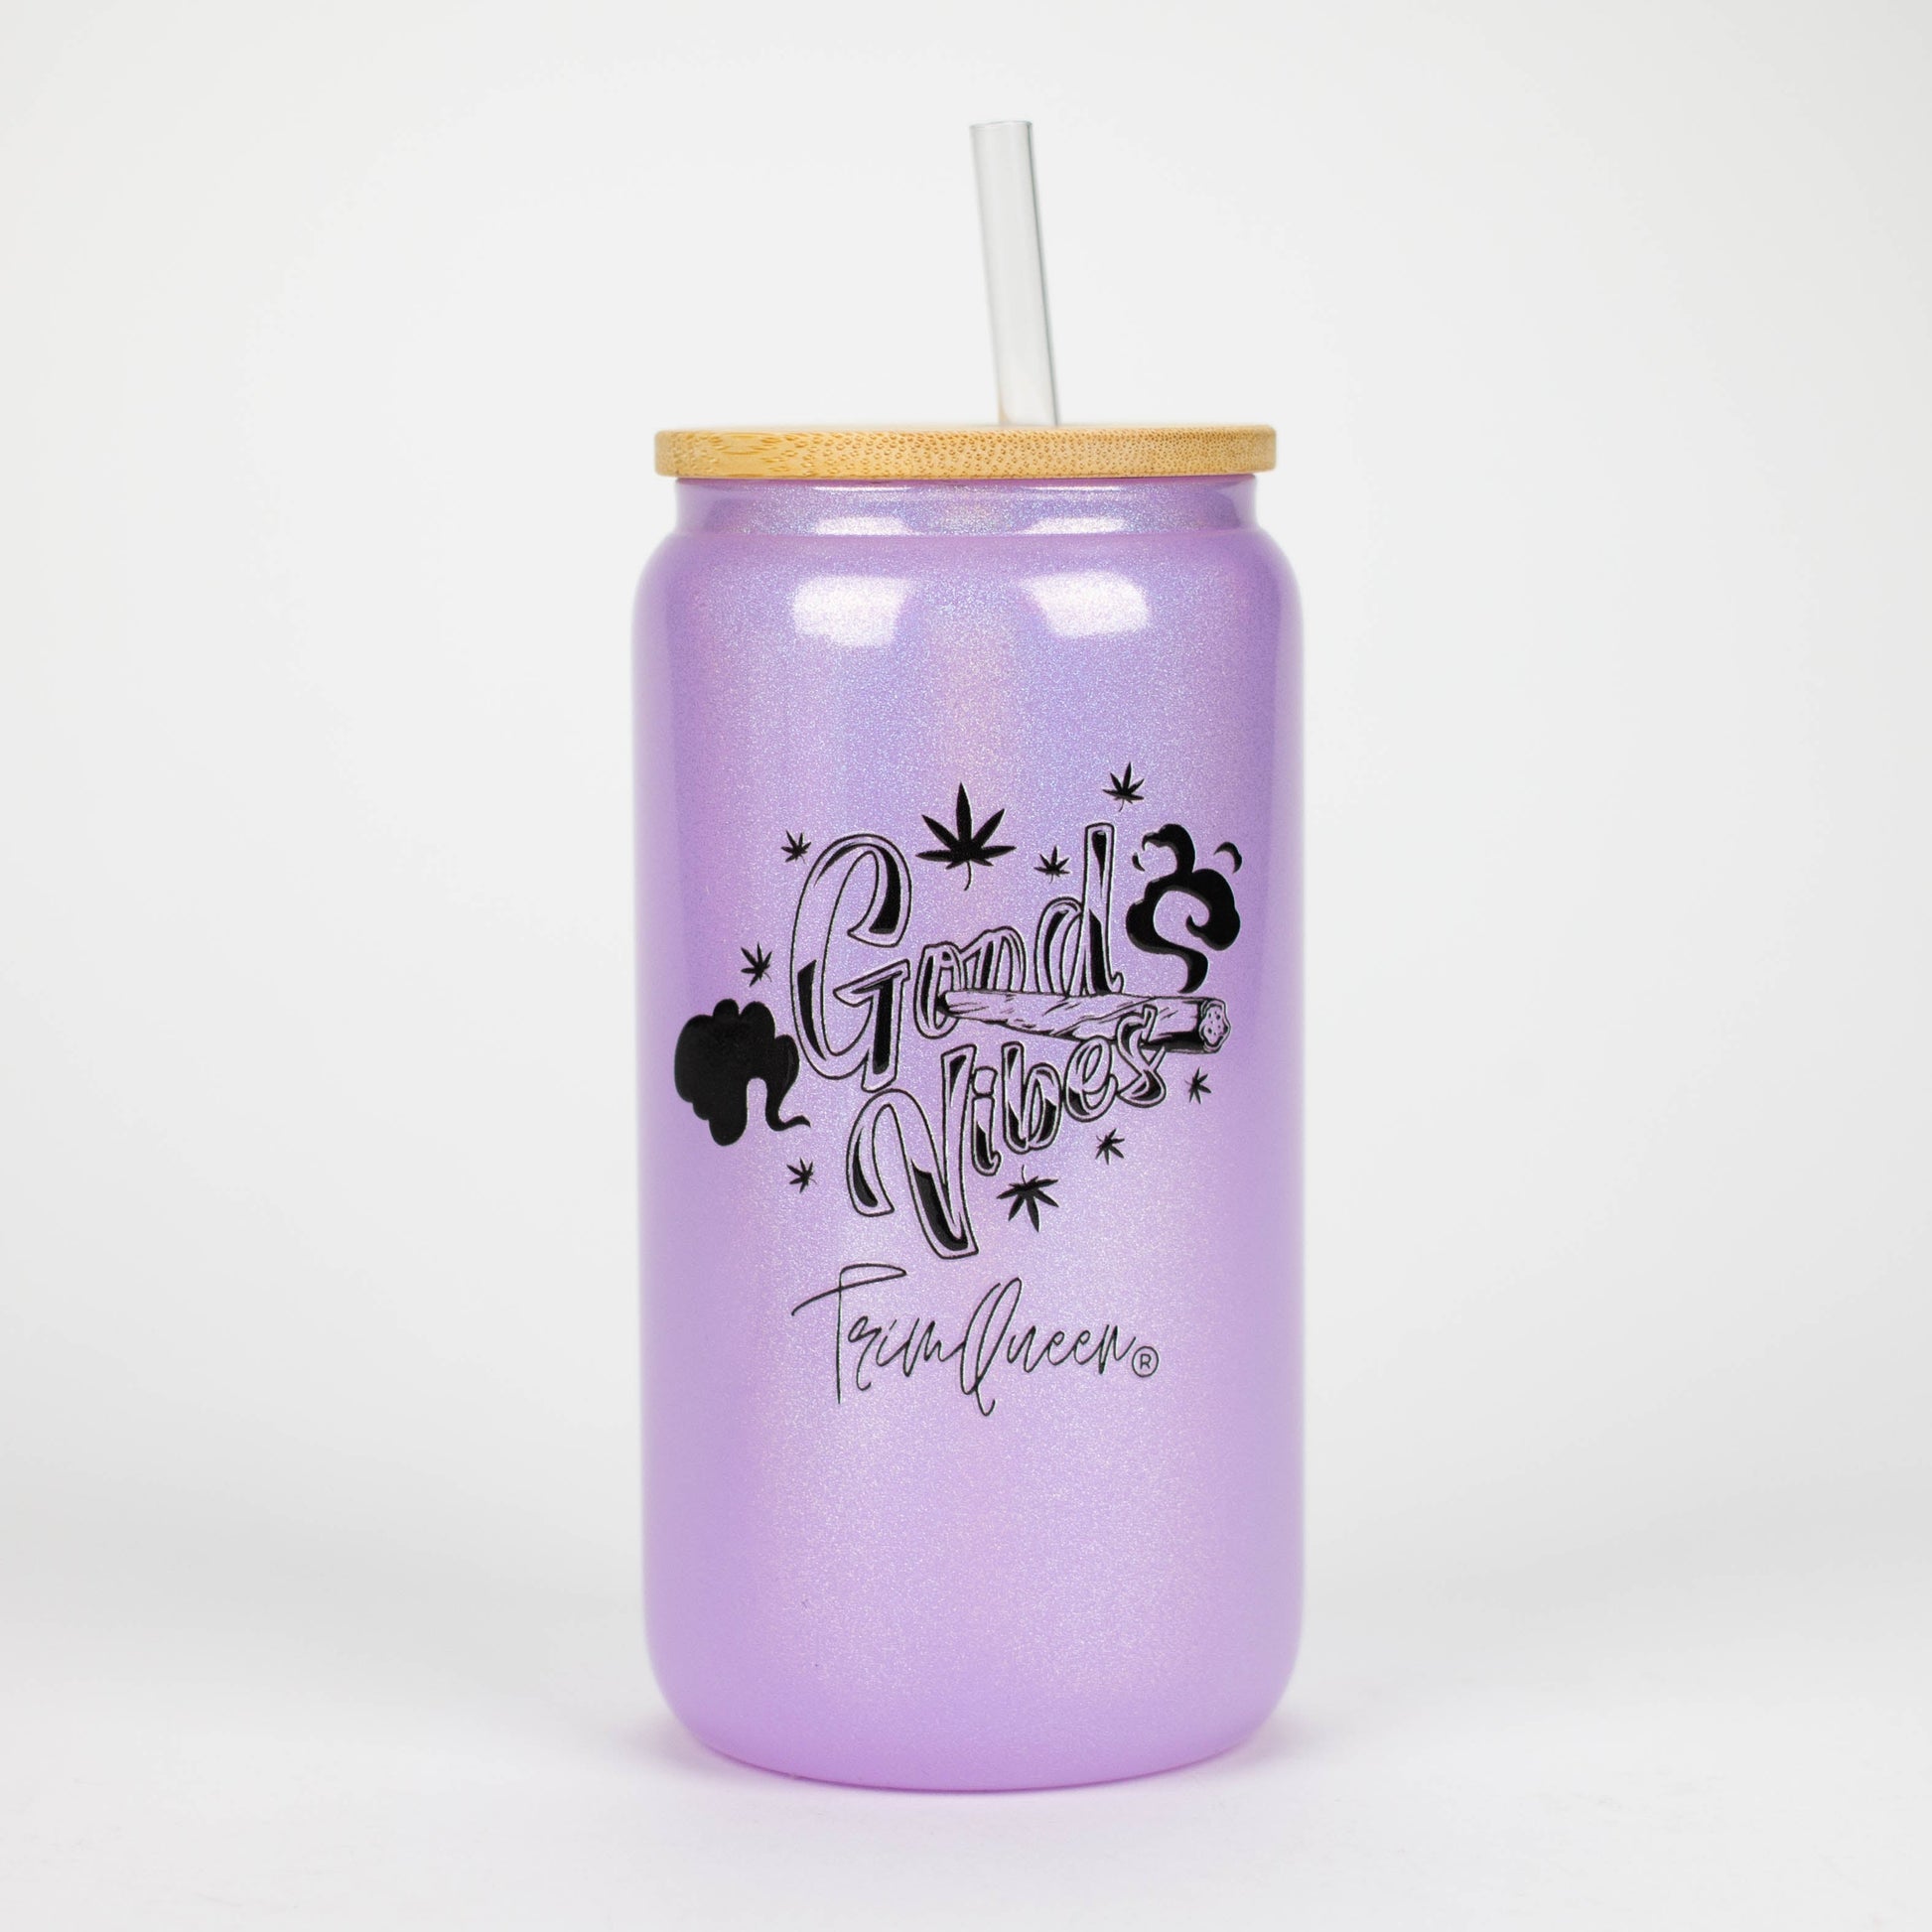 TRIM QUEEN | GOOD VIBES GLASS TUMBLER WITH LID AND STRAW_11